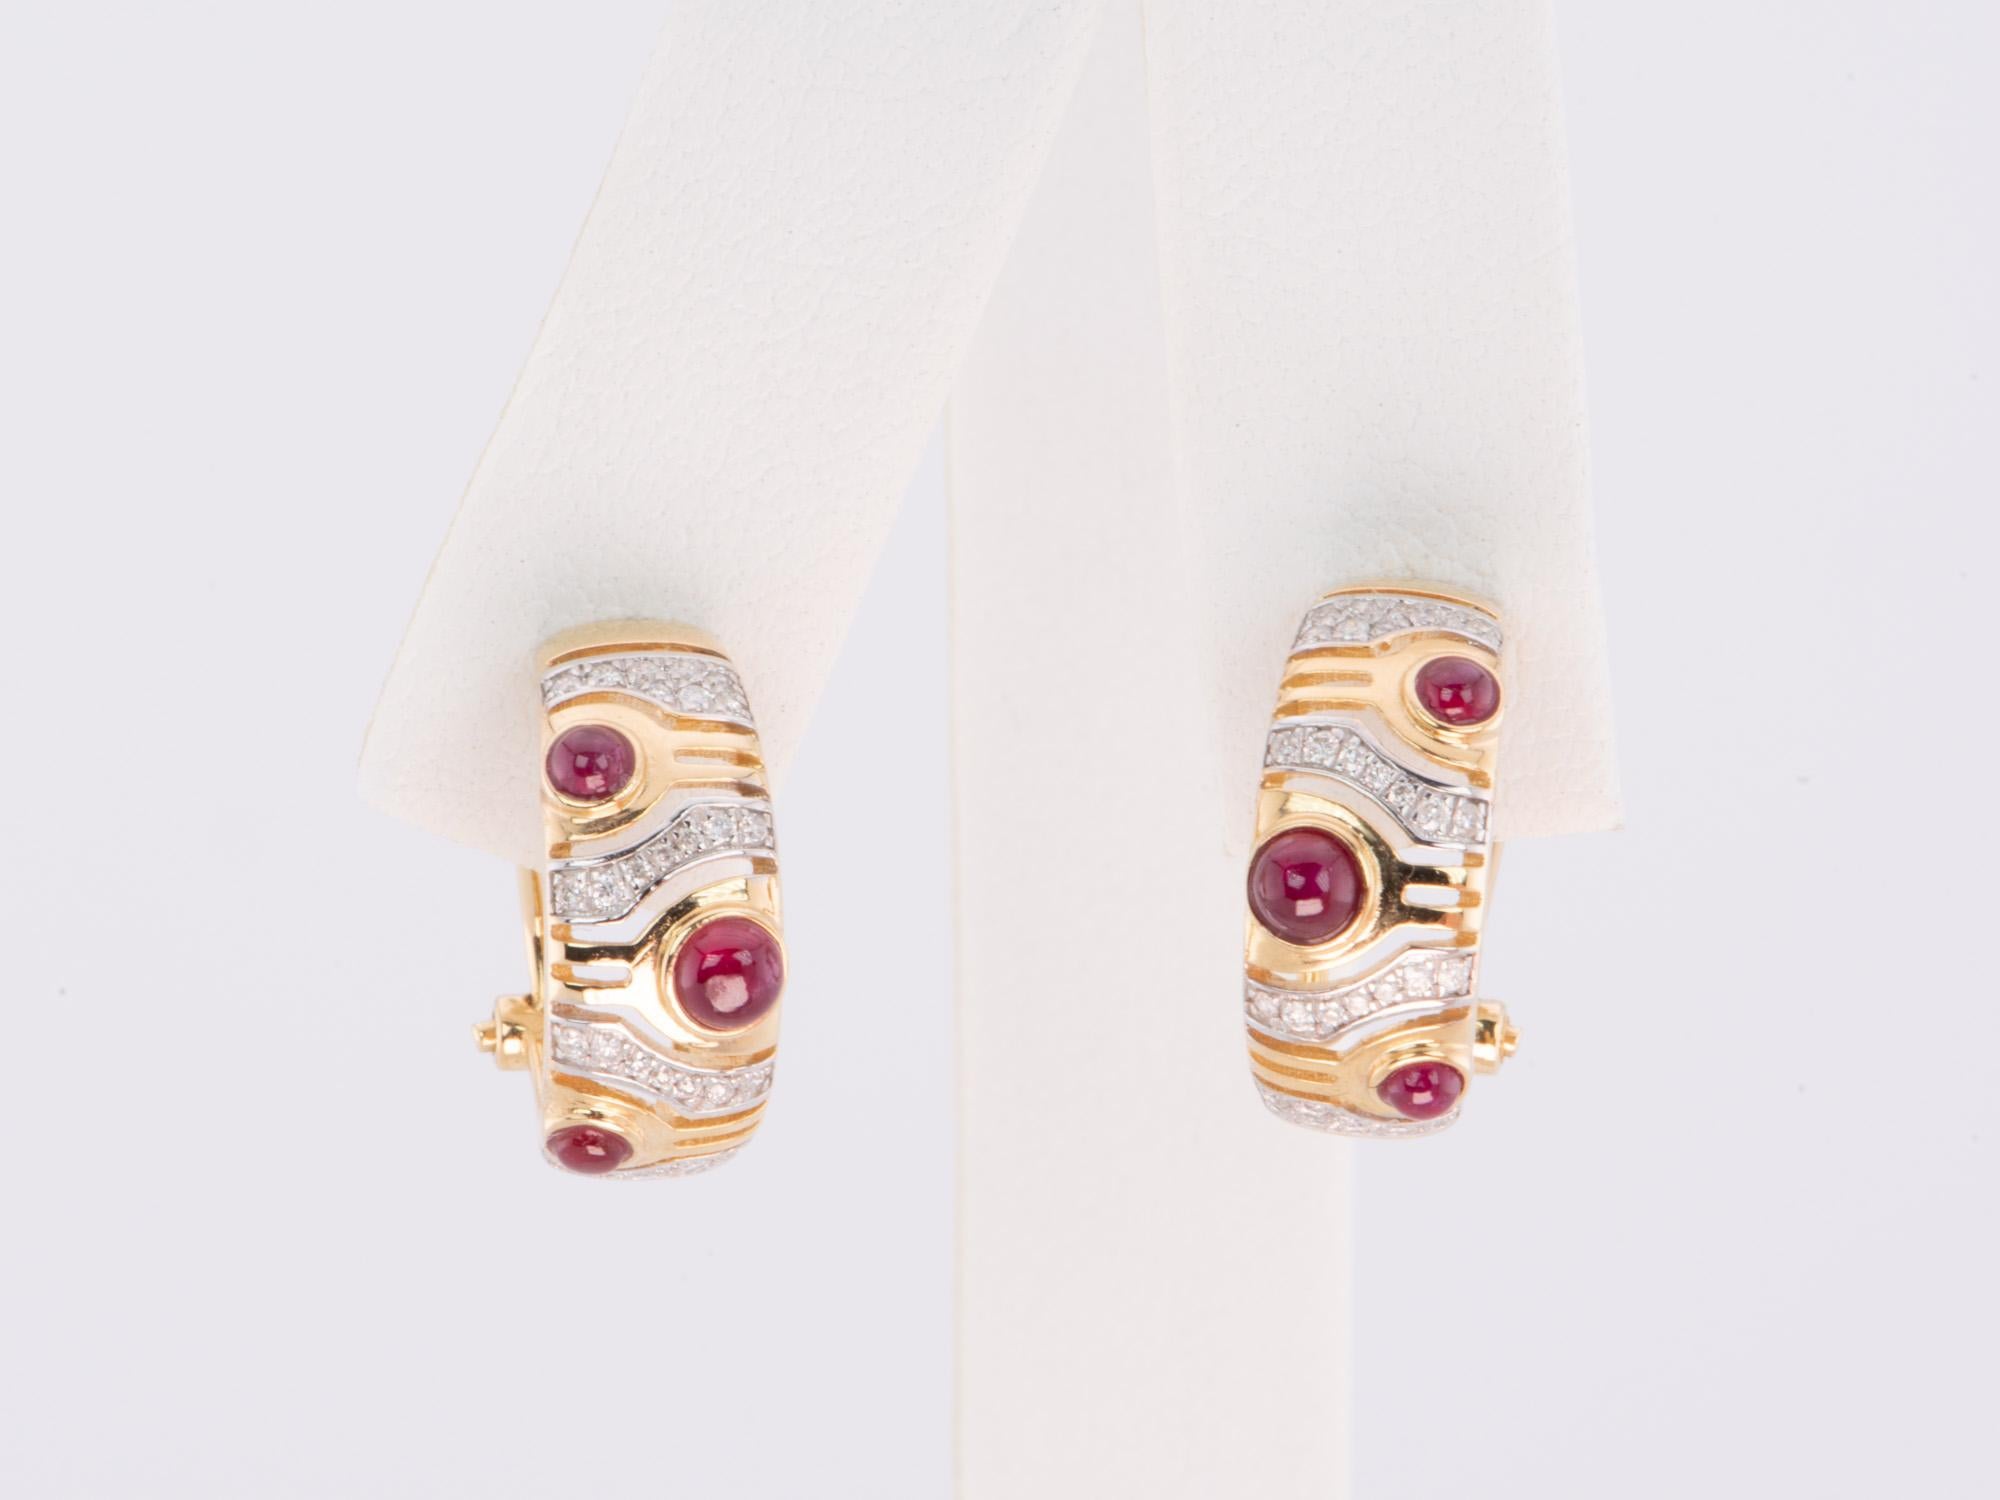 ♥ 18K Gold Ruby and Diamond Designer Earrings with Omega Clip Backing
♥ Each earring measures 15.4mm in length and 6.5mm in width

♥ Material: 18K Gold
♥ Gemstone: Ruby, 0.7ct; Diamond, 0.3ct